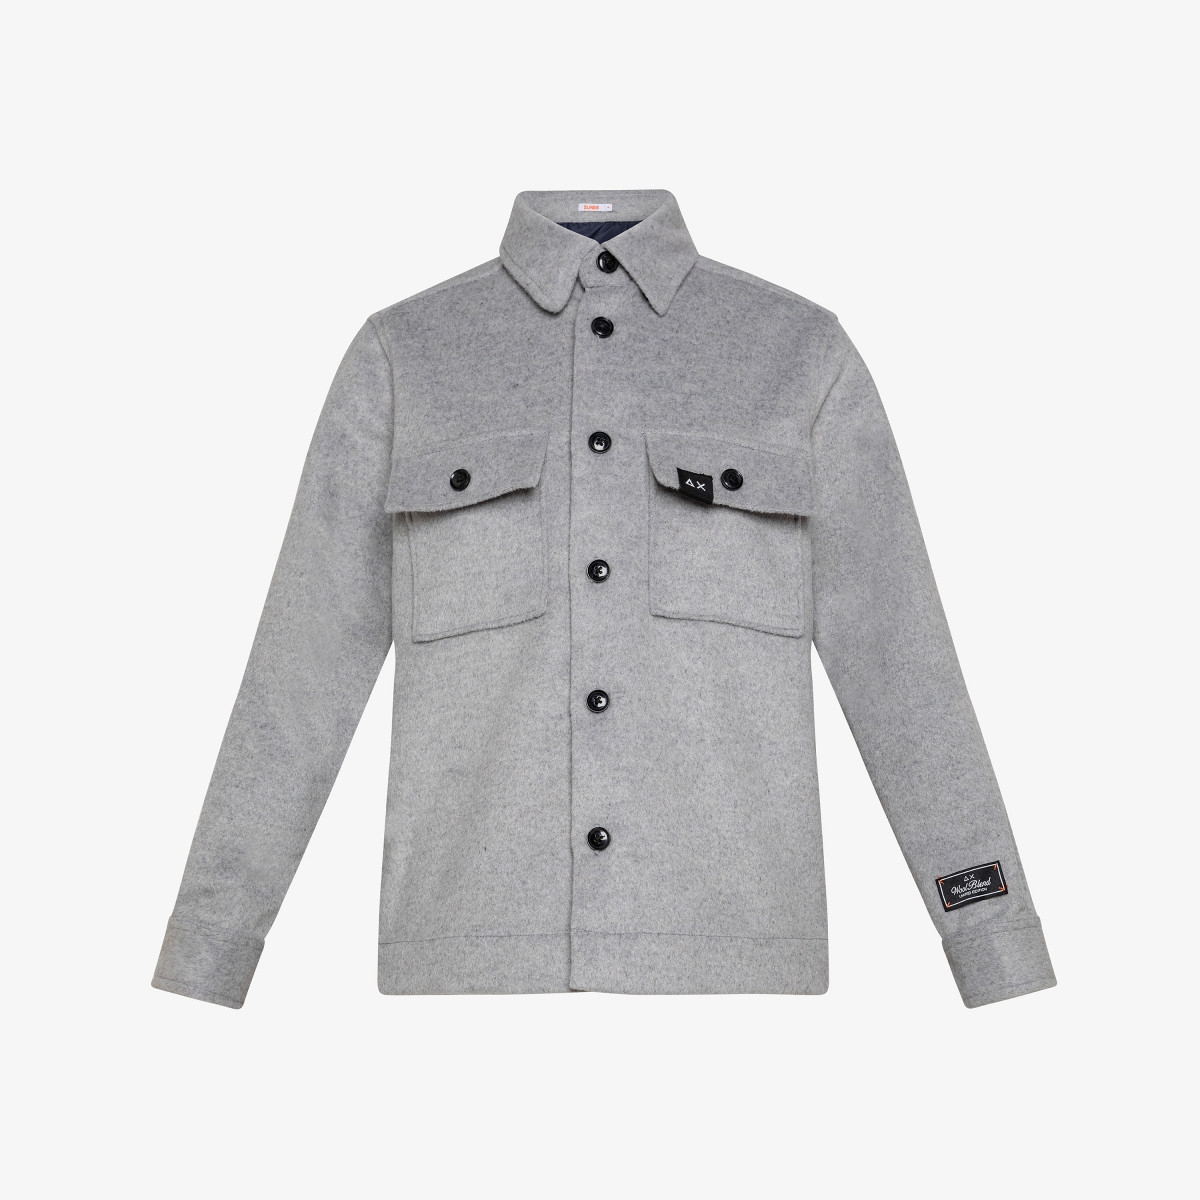 BOY'S OVERSHIRT WITH POCKET ON CHEST L/S LIGHT GREY